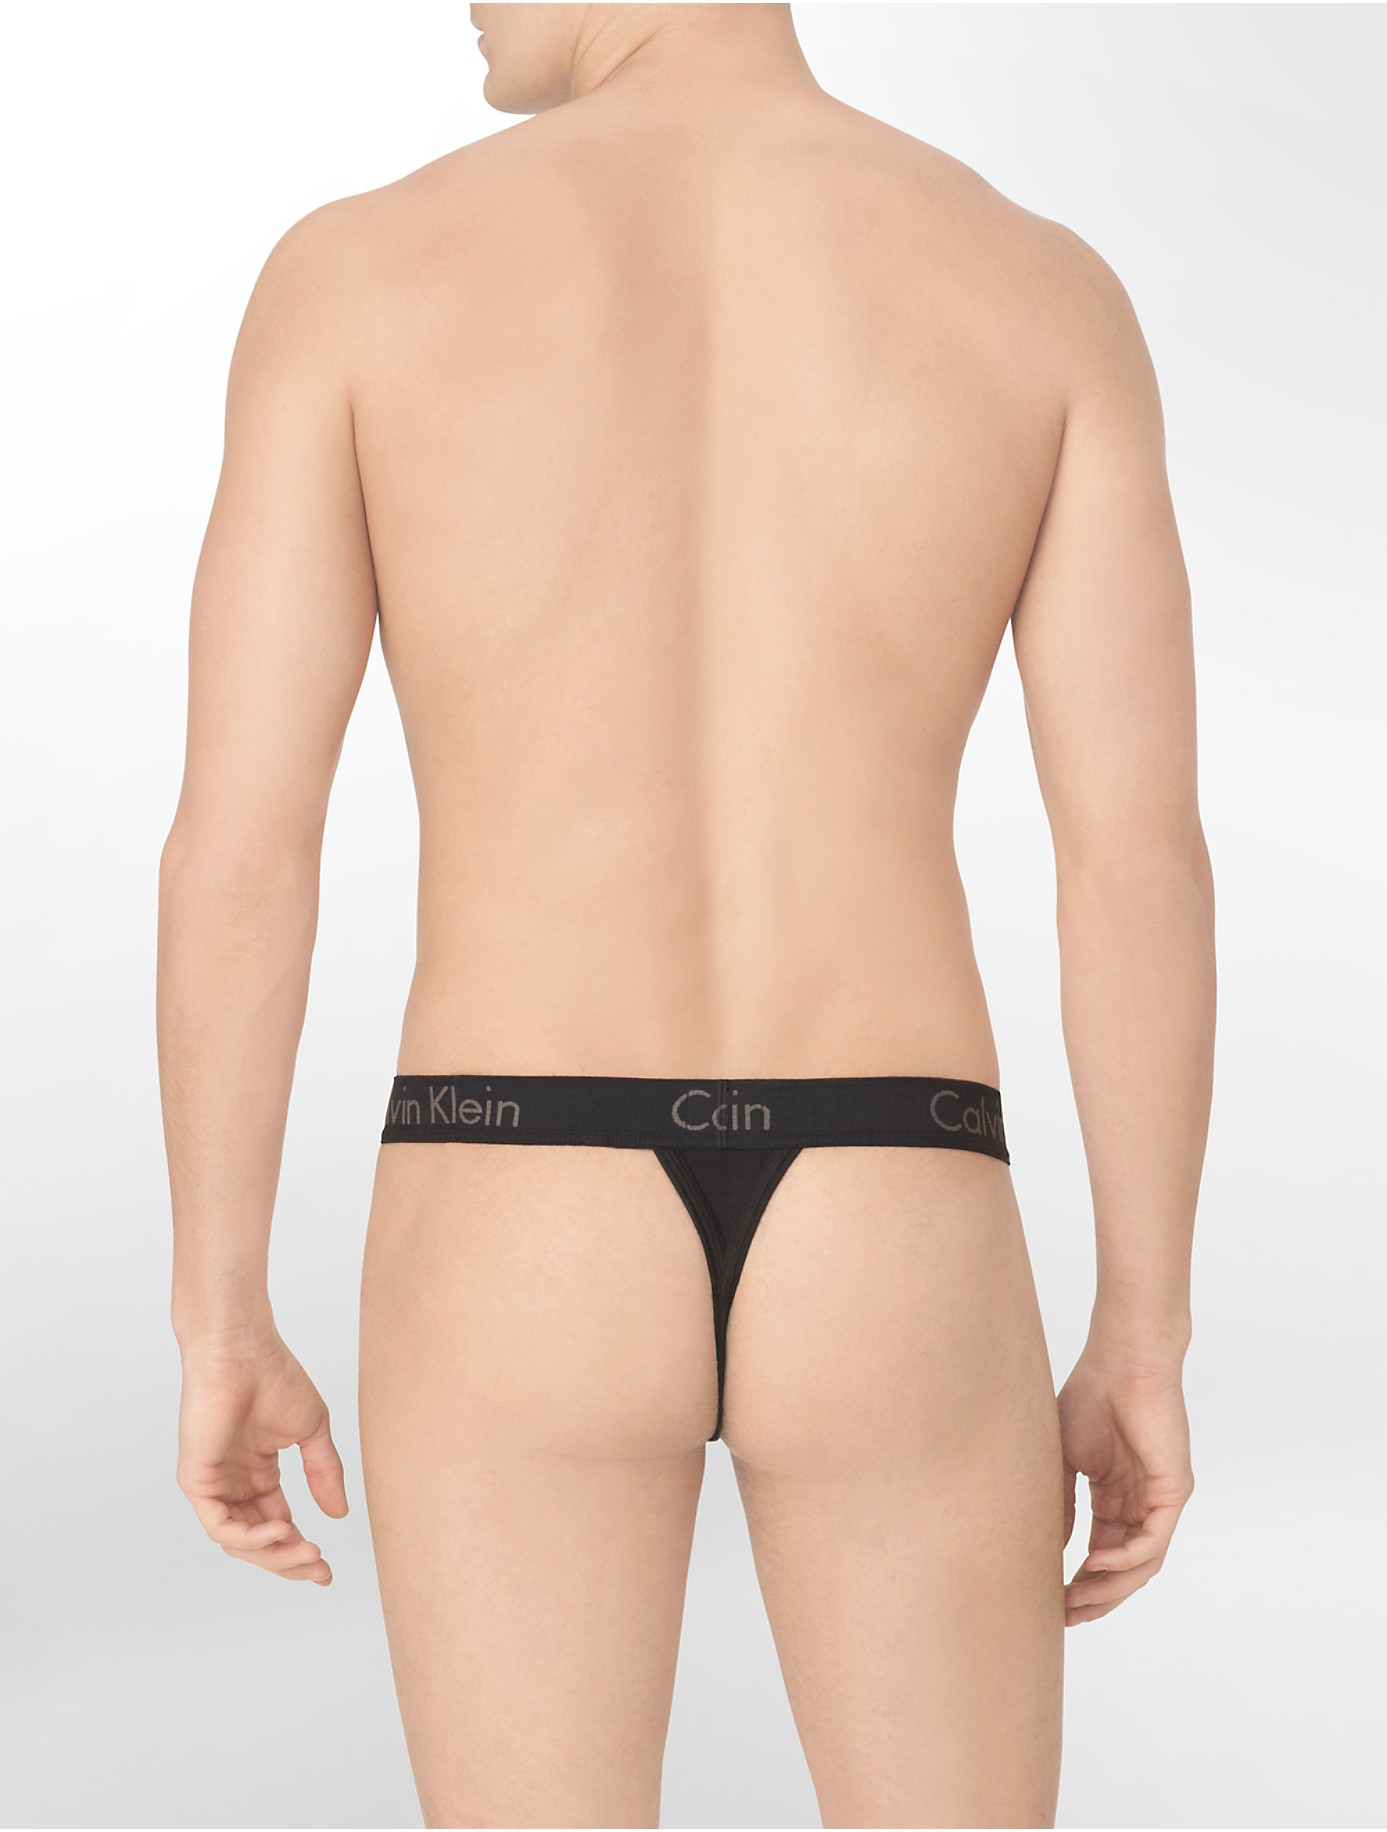 Why Is The Pouch In Calvin Klein Underwear So Small? Quora |  